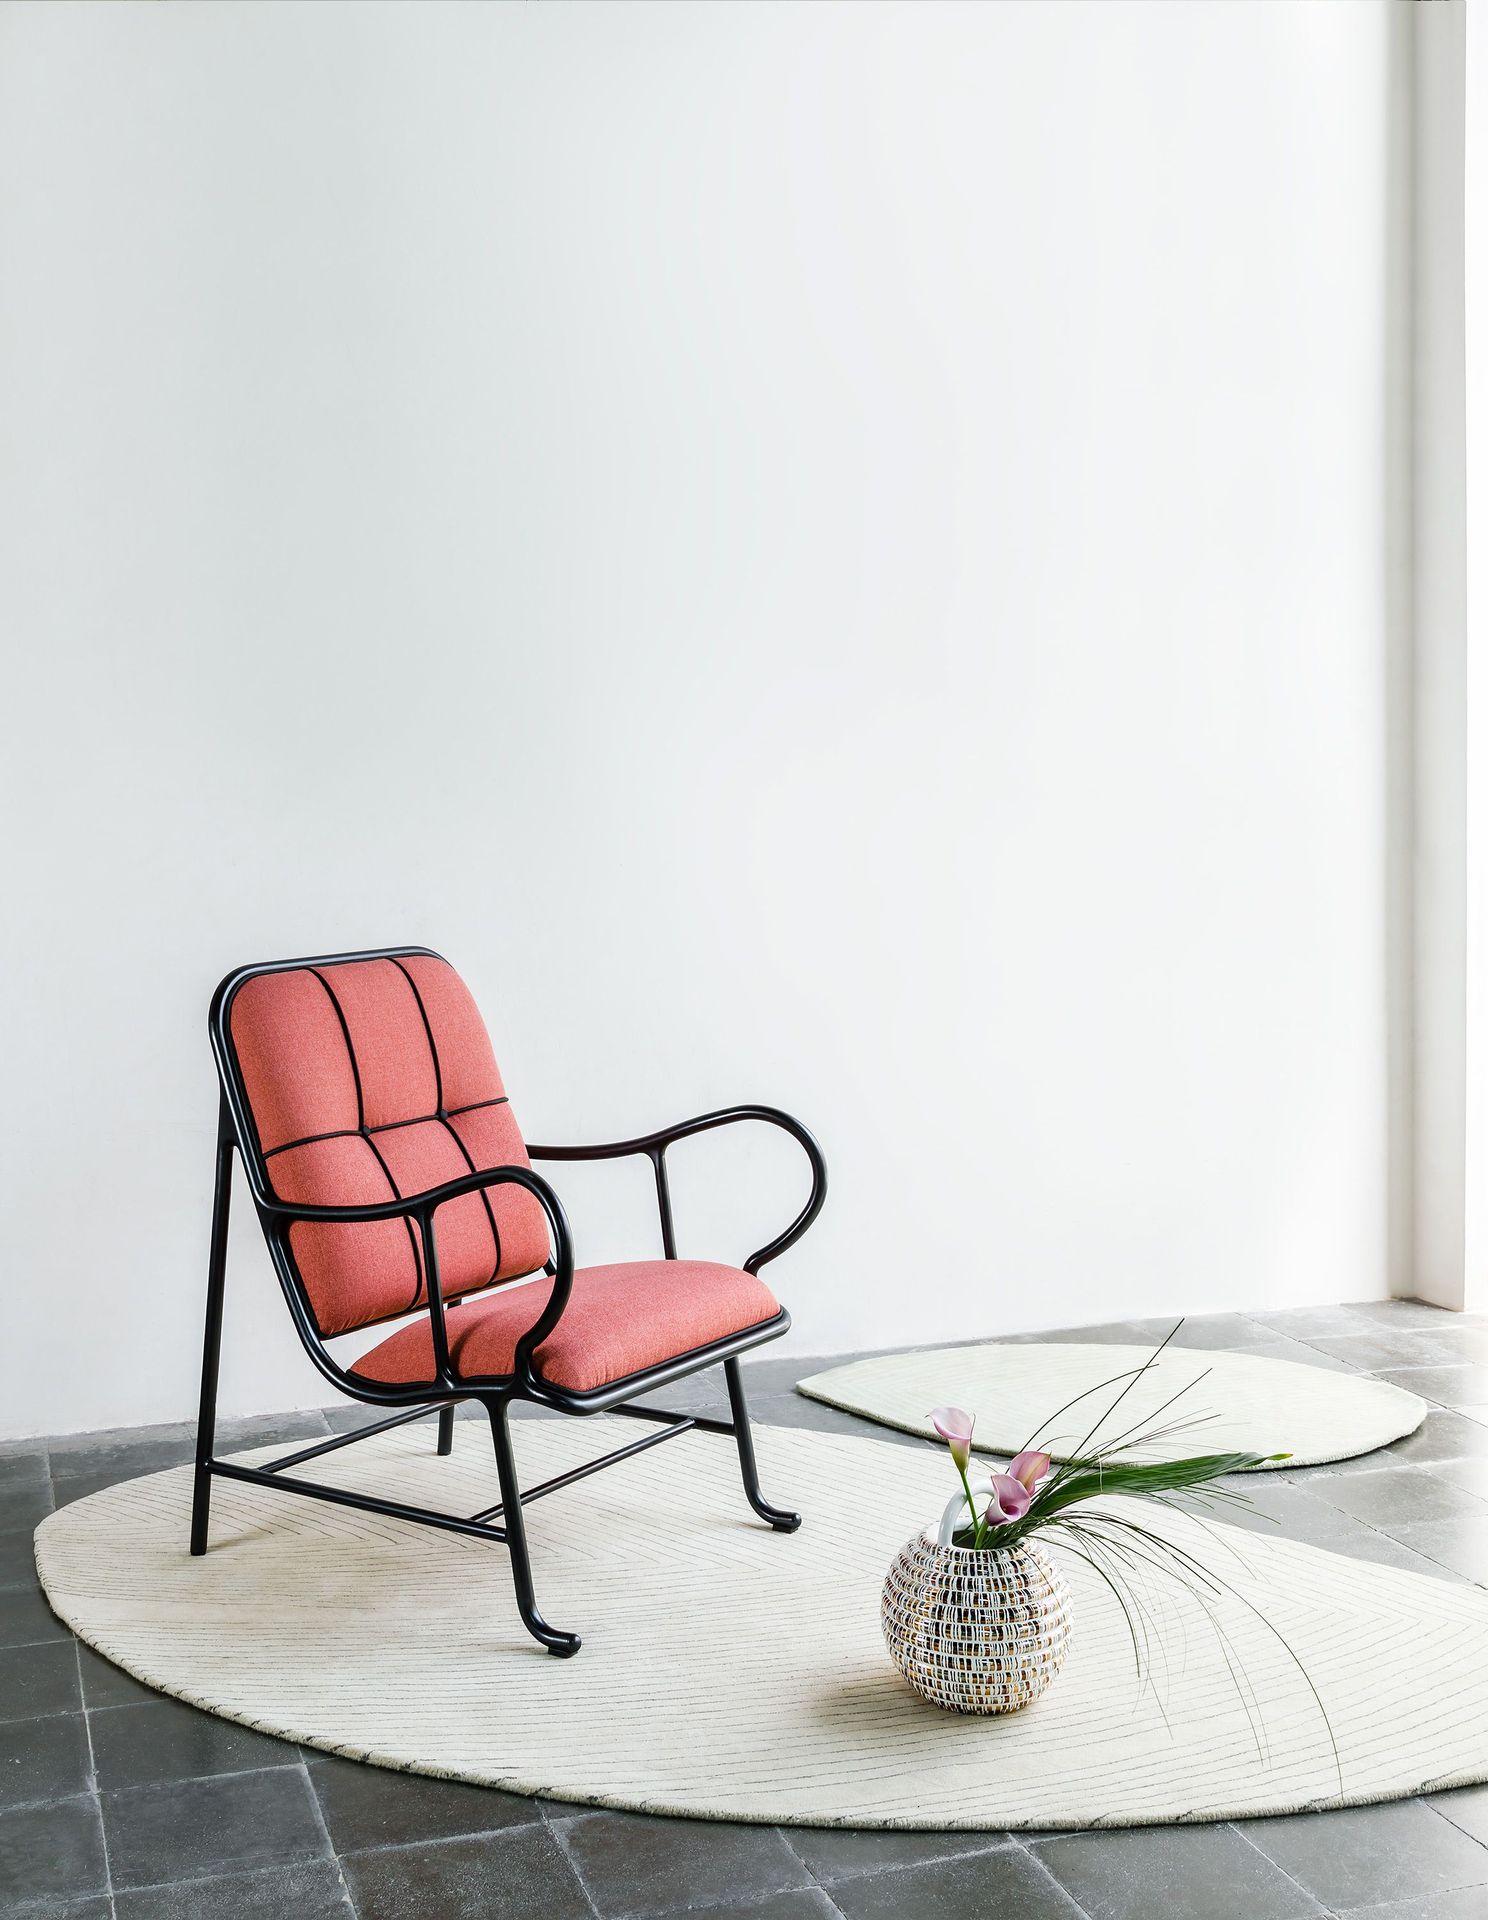 Indoor Gardenia Red armchair by Jaime Hayon 
Dimensions: D 89 x W 70 x H 100 cm 
Materials: structure in cast aluminum and laminates in extruded aluminum. Powder coating in Alesta Anodic Black or in high-gloss yellow (RAL 1005). Seat and backrest